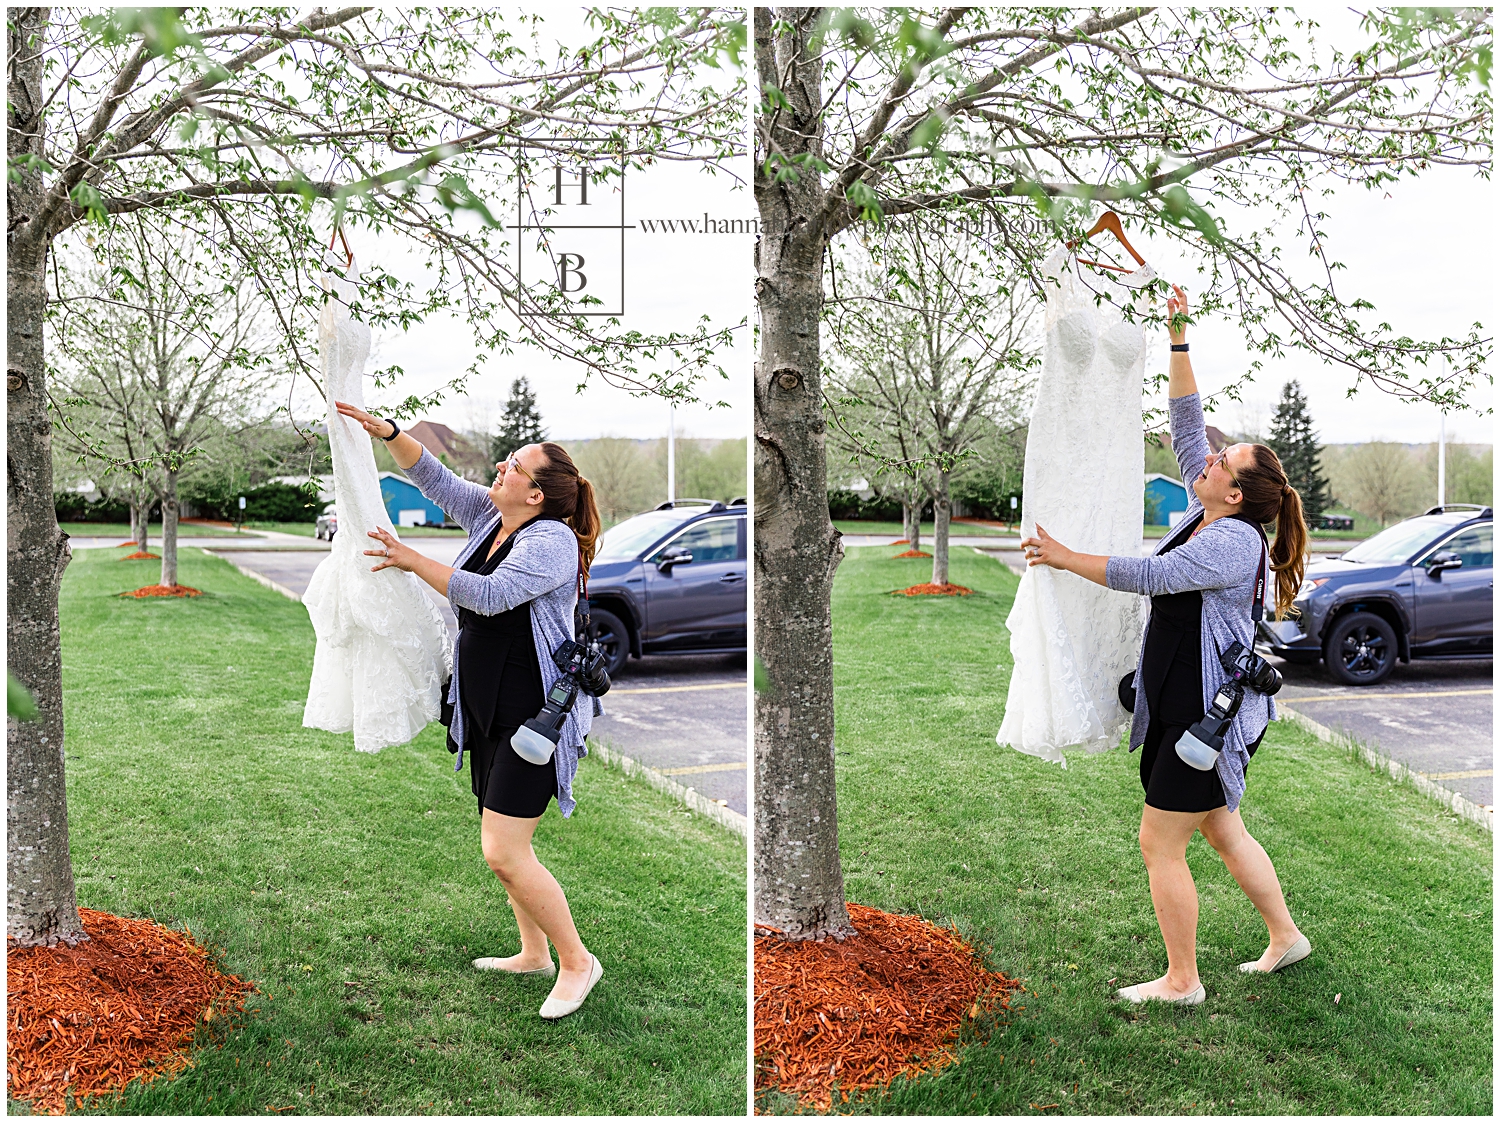 Wedding photographer hands dress in tree on windy day.